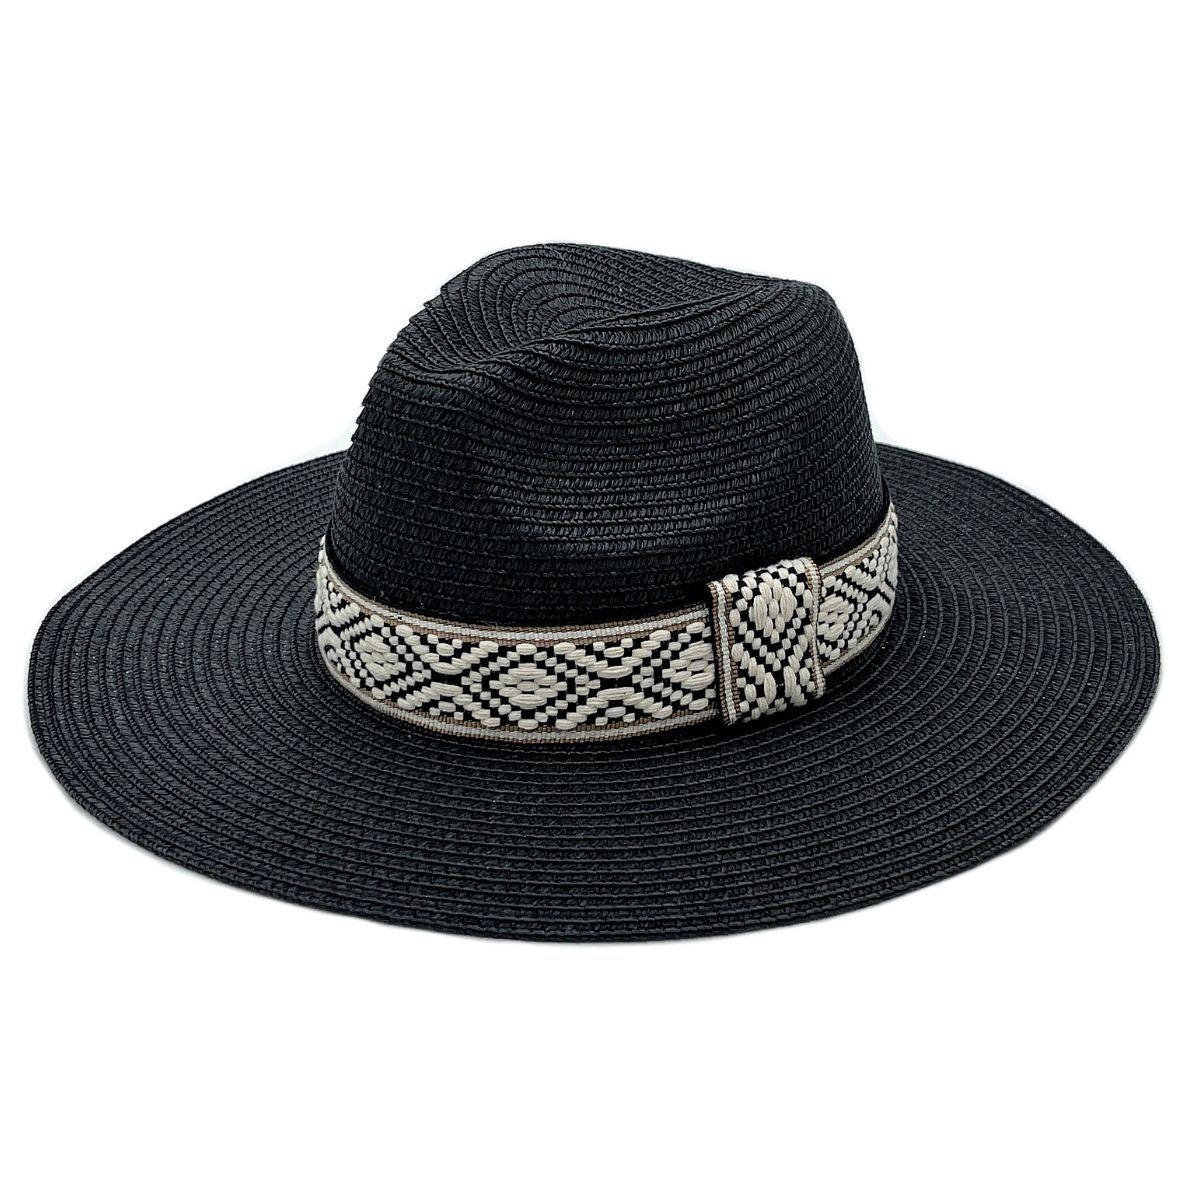 Black Womens Panama Straw Hat with Woven Detail